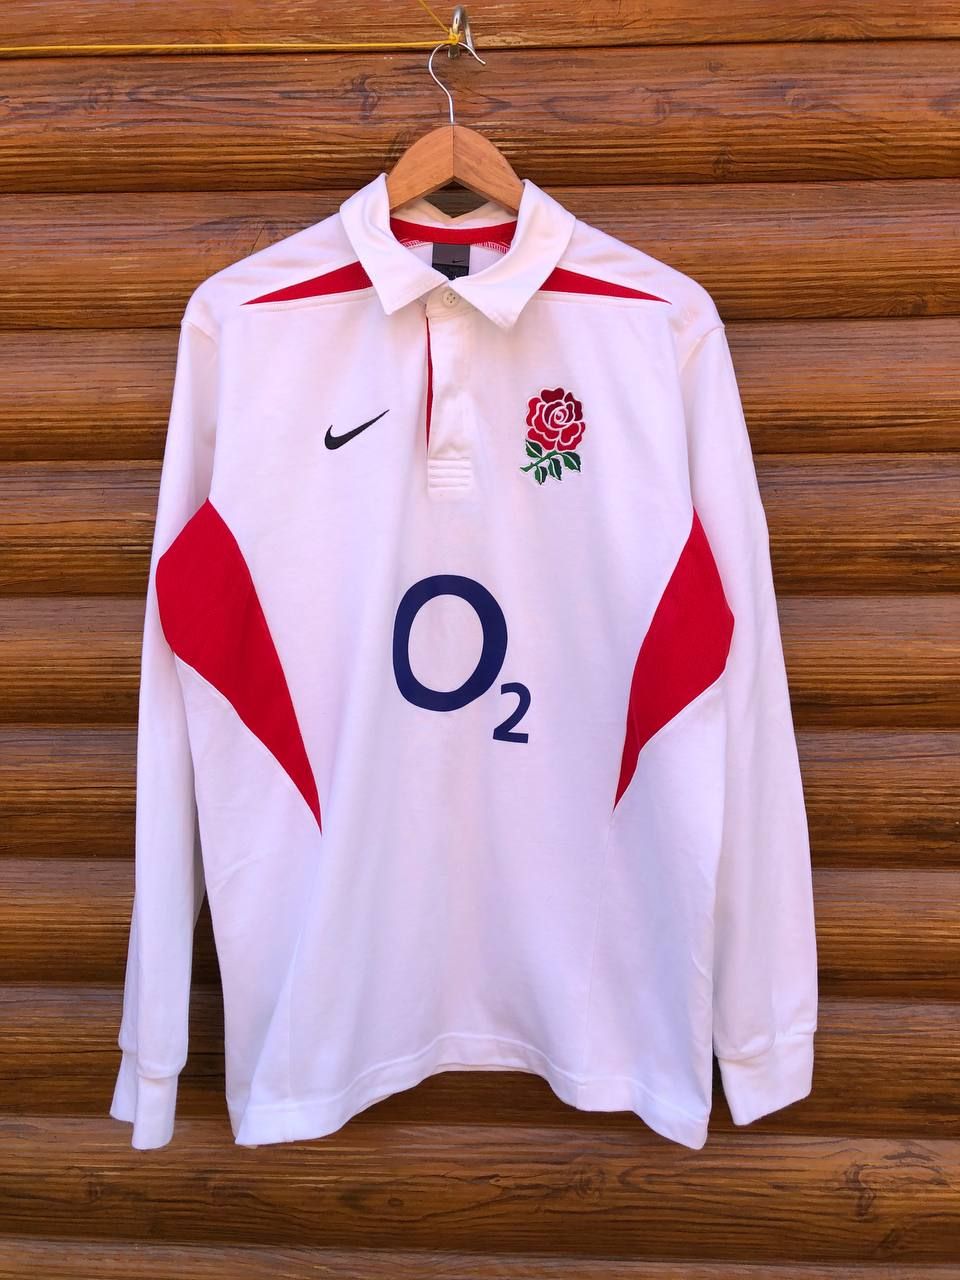 Pre-owned Nike X Soccer Jersey Vintage England Rugby Union Nike Home Shirt Jersey In White